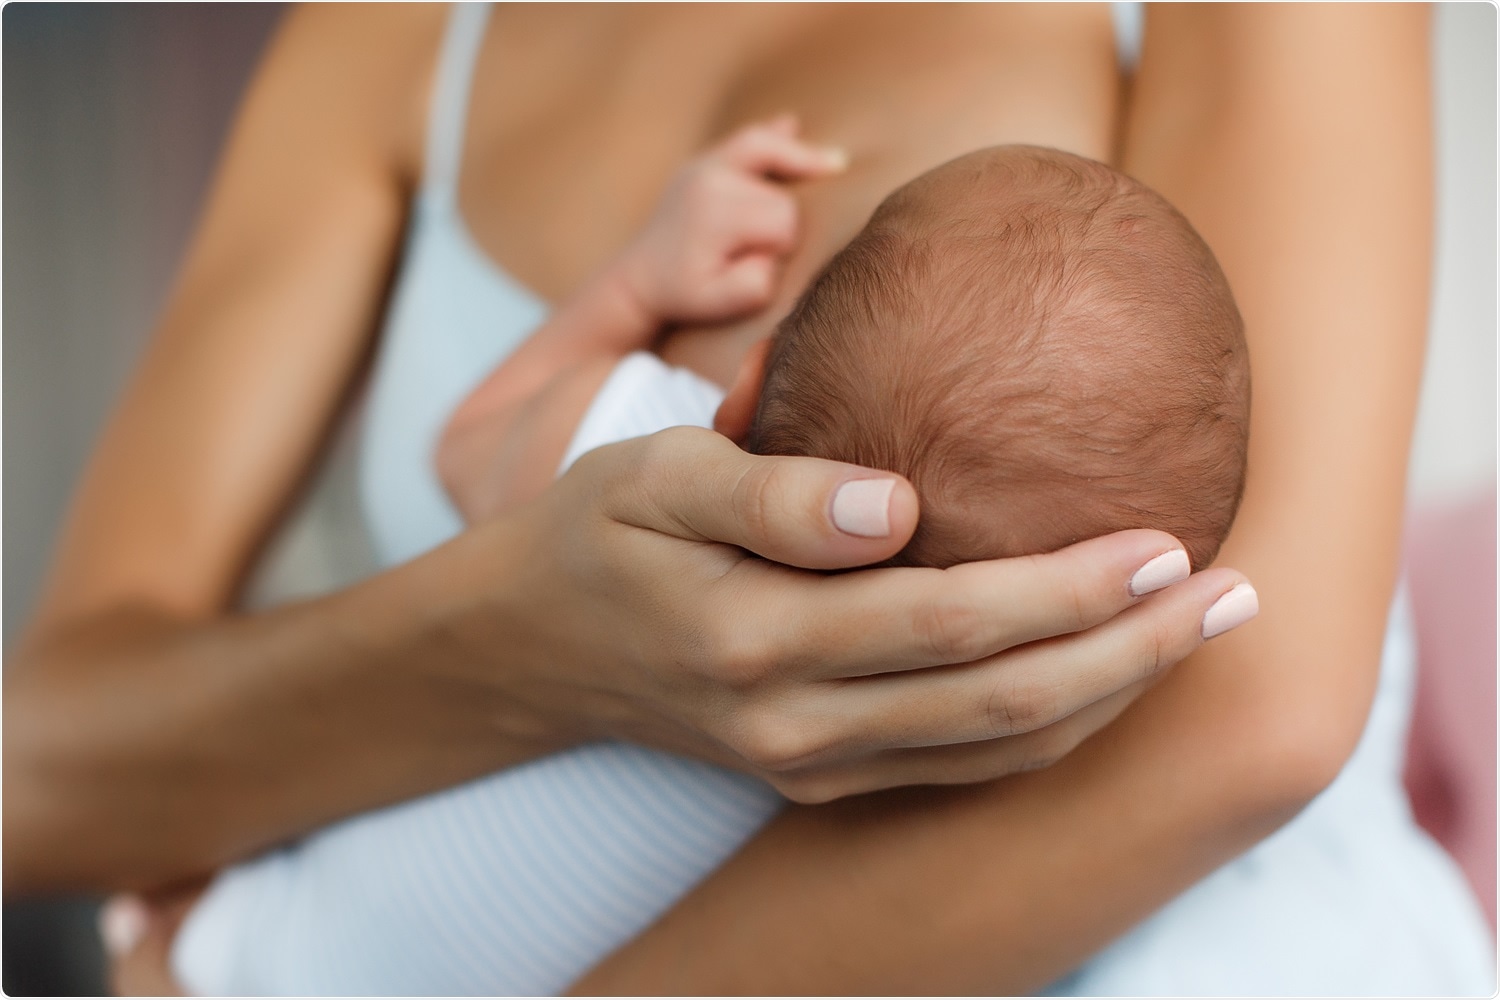 Study: Breastfeeding infants receive neutralizing antibodies and cytokines from mothers immunized with a COVID-19 mRNA vaccine. Image Credit: HTeam / Shutterstock